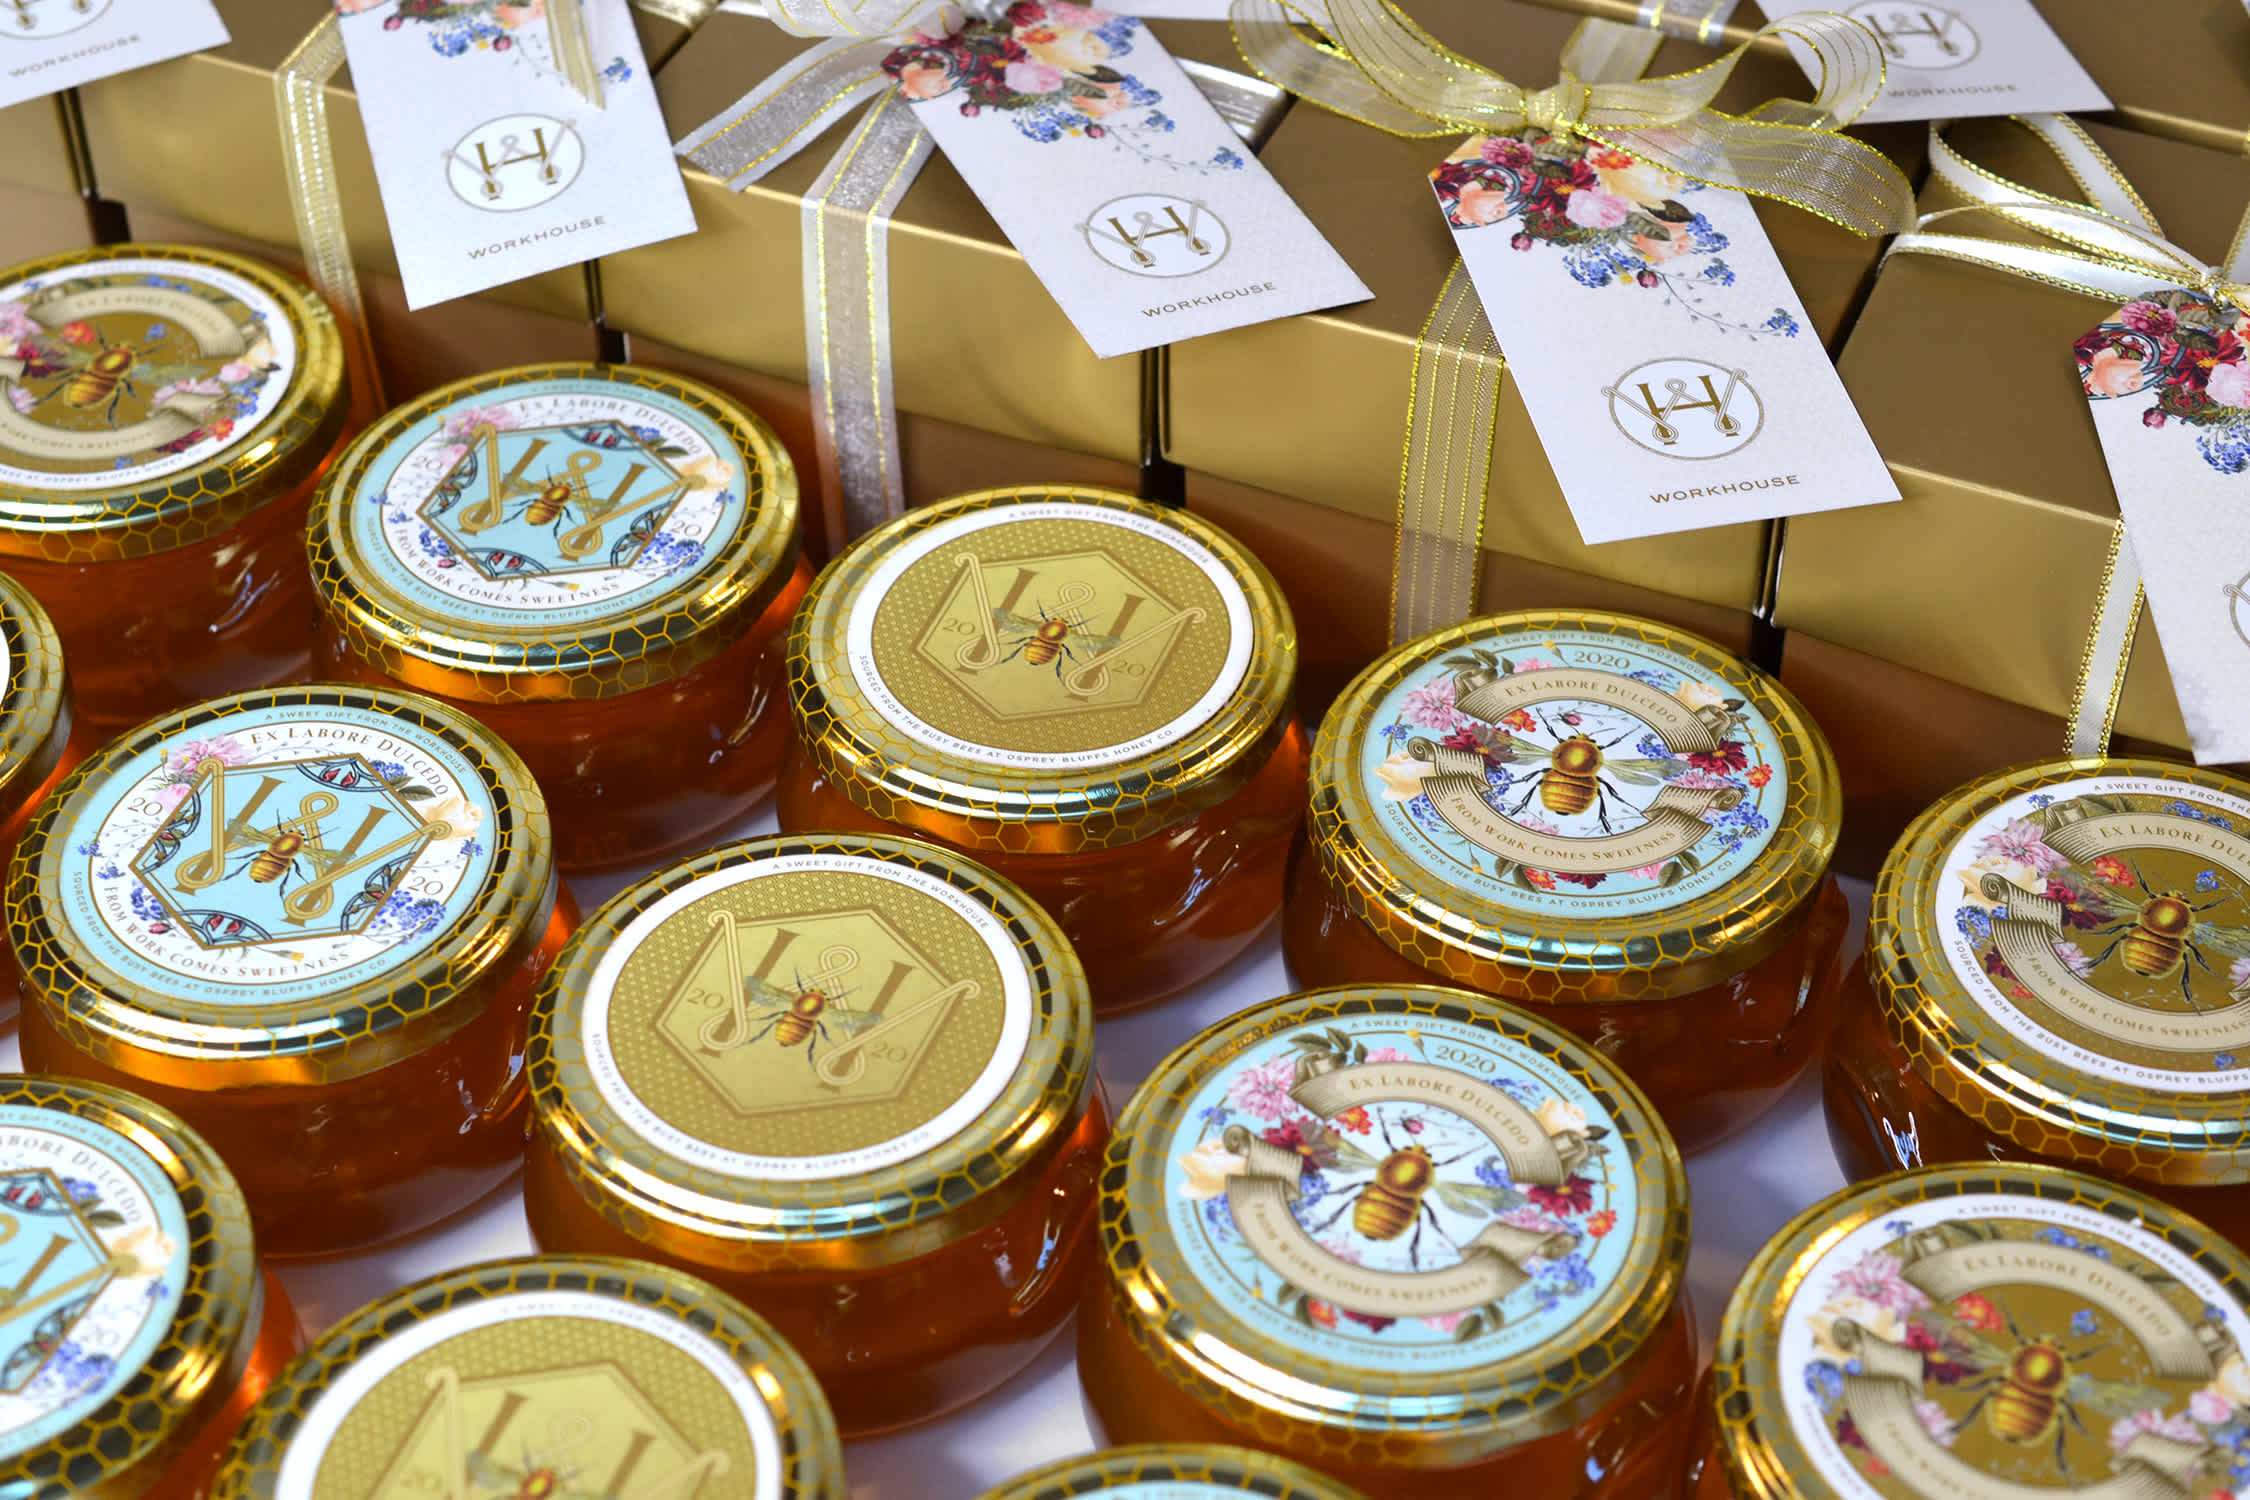 honey jars and boxes